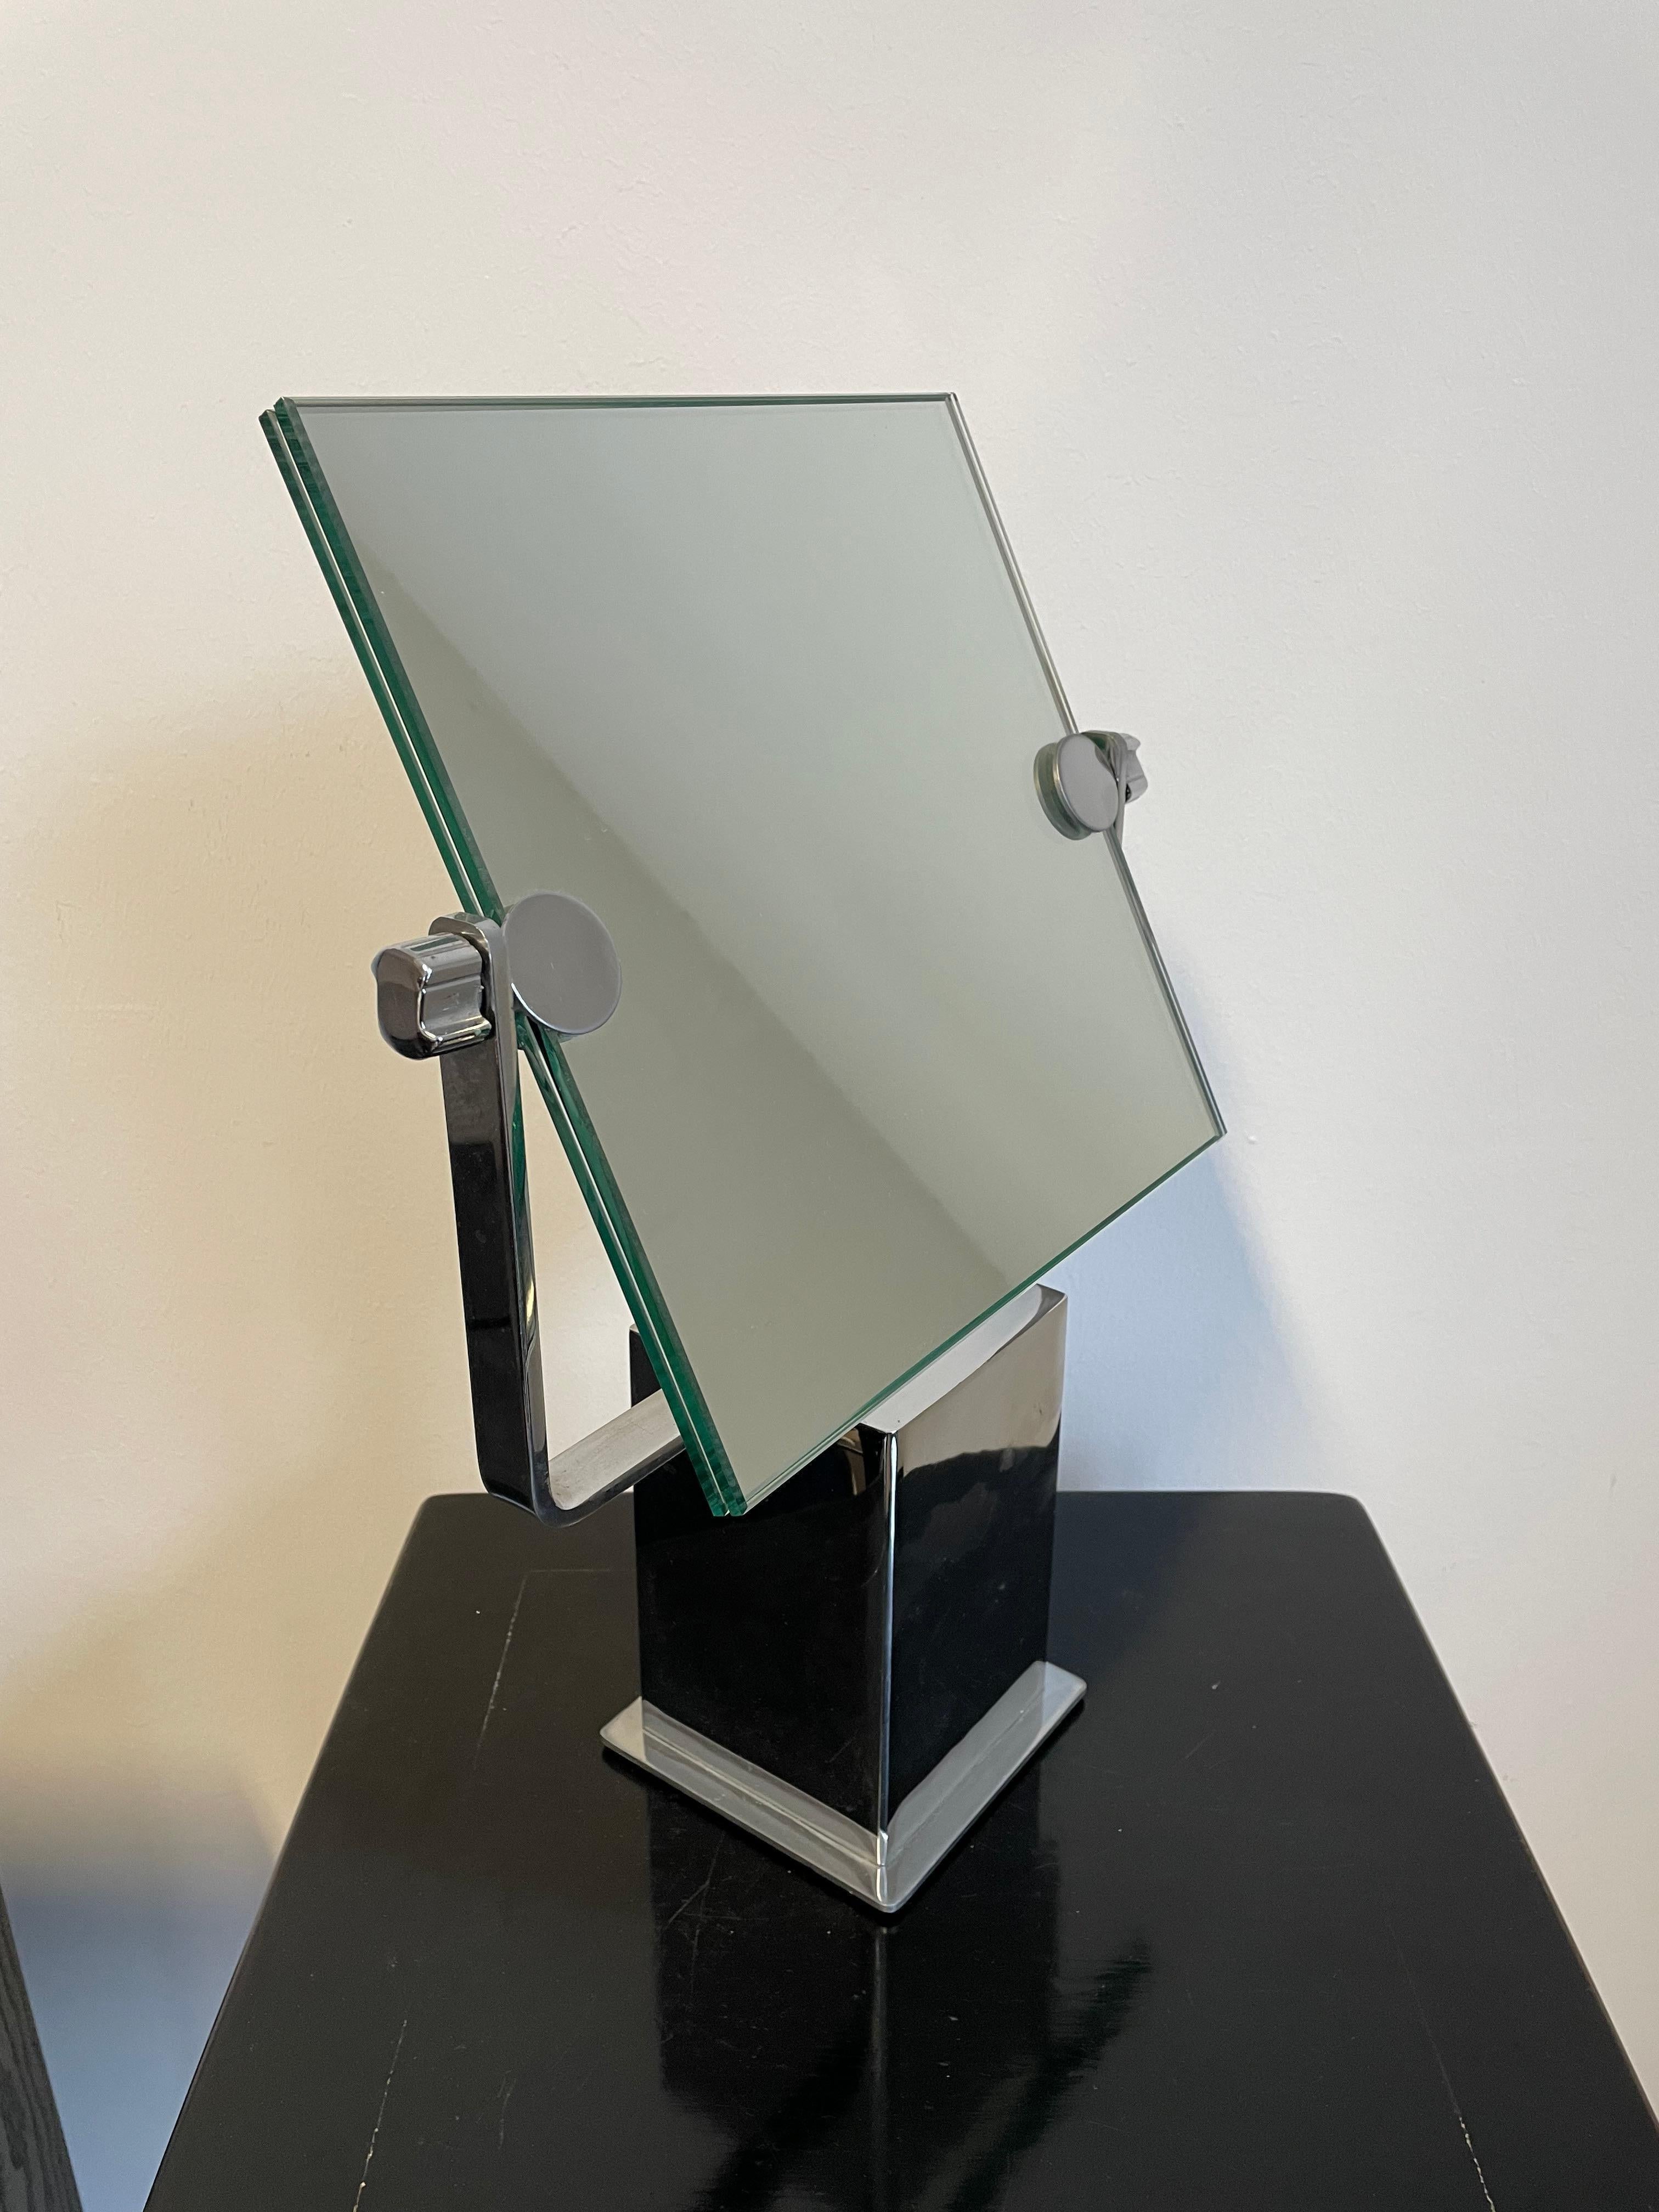 Art Deco Adjustable Table Mirror On Silver Square Chrome Stand 

THE MIRROR IS MODERN AND WILL GO VERY WELL WITH CONTEMPORARY INTERIOR - IT IS NOT A USEFUL ITEM - IT IS A BEAUTIFUL DECORATION FOR EACH VANITY OR DRESSING TABLE

THE MIRROR SHEET IS